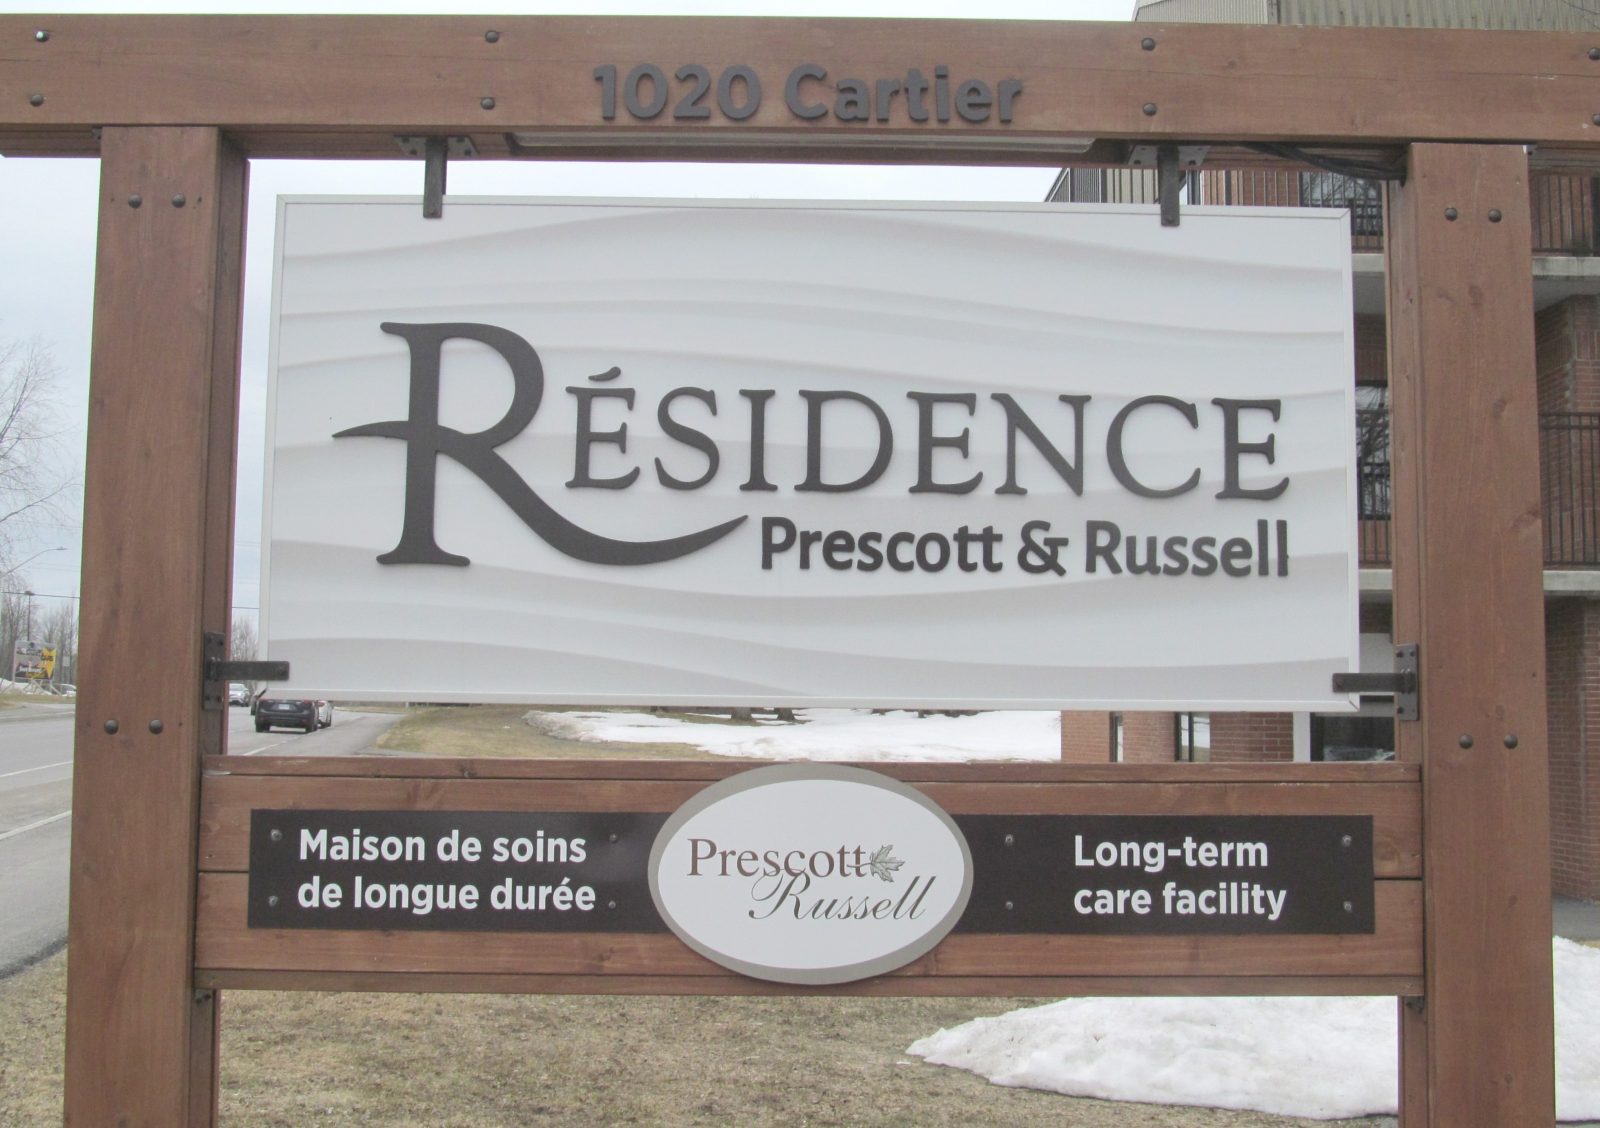 10 additional COVID cases at Prescott Russell Residence; 25 in total